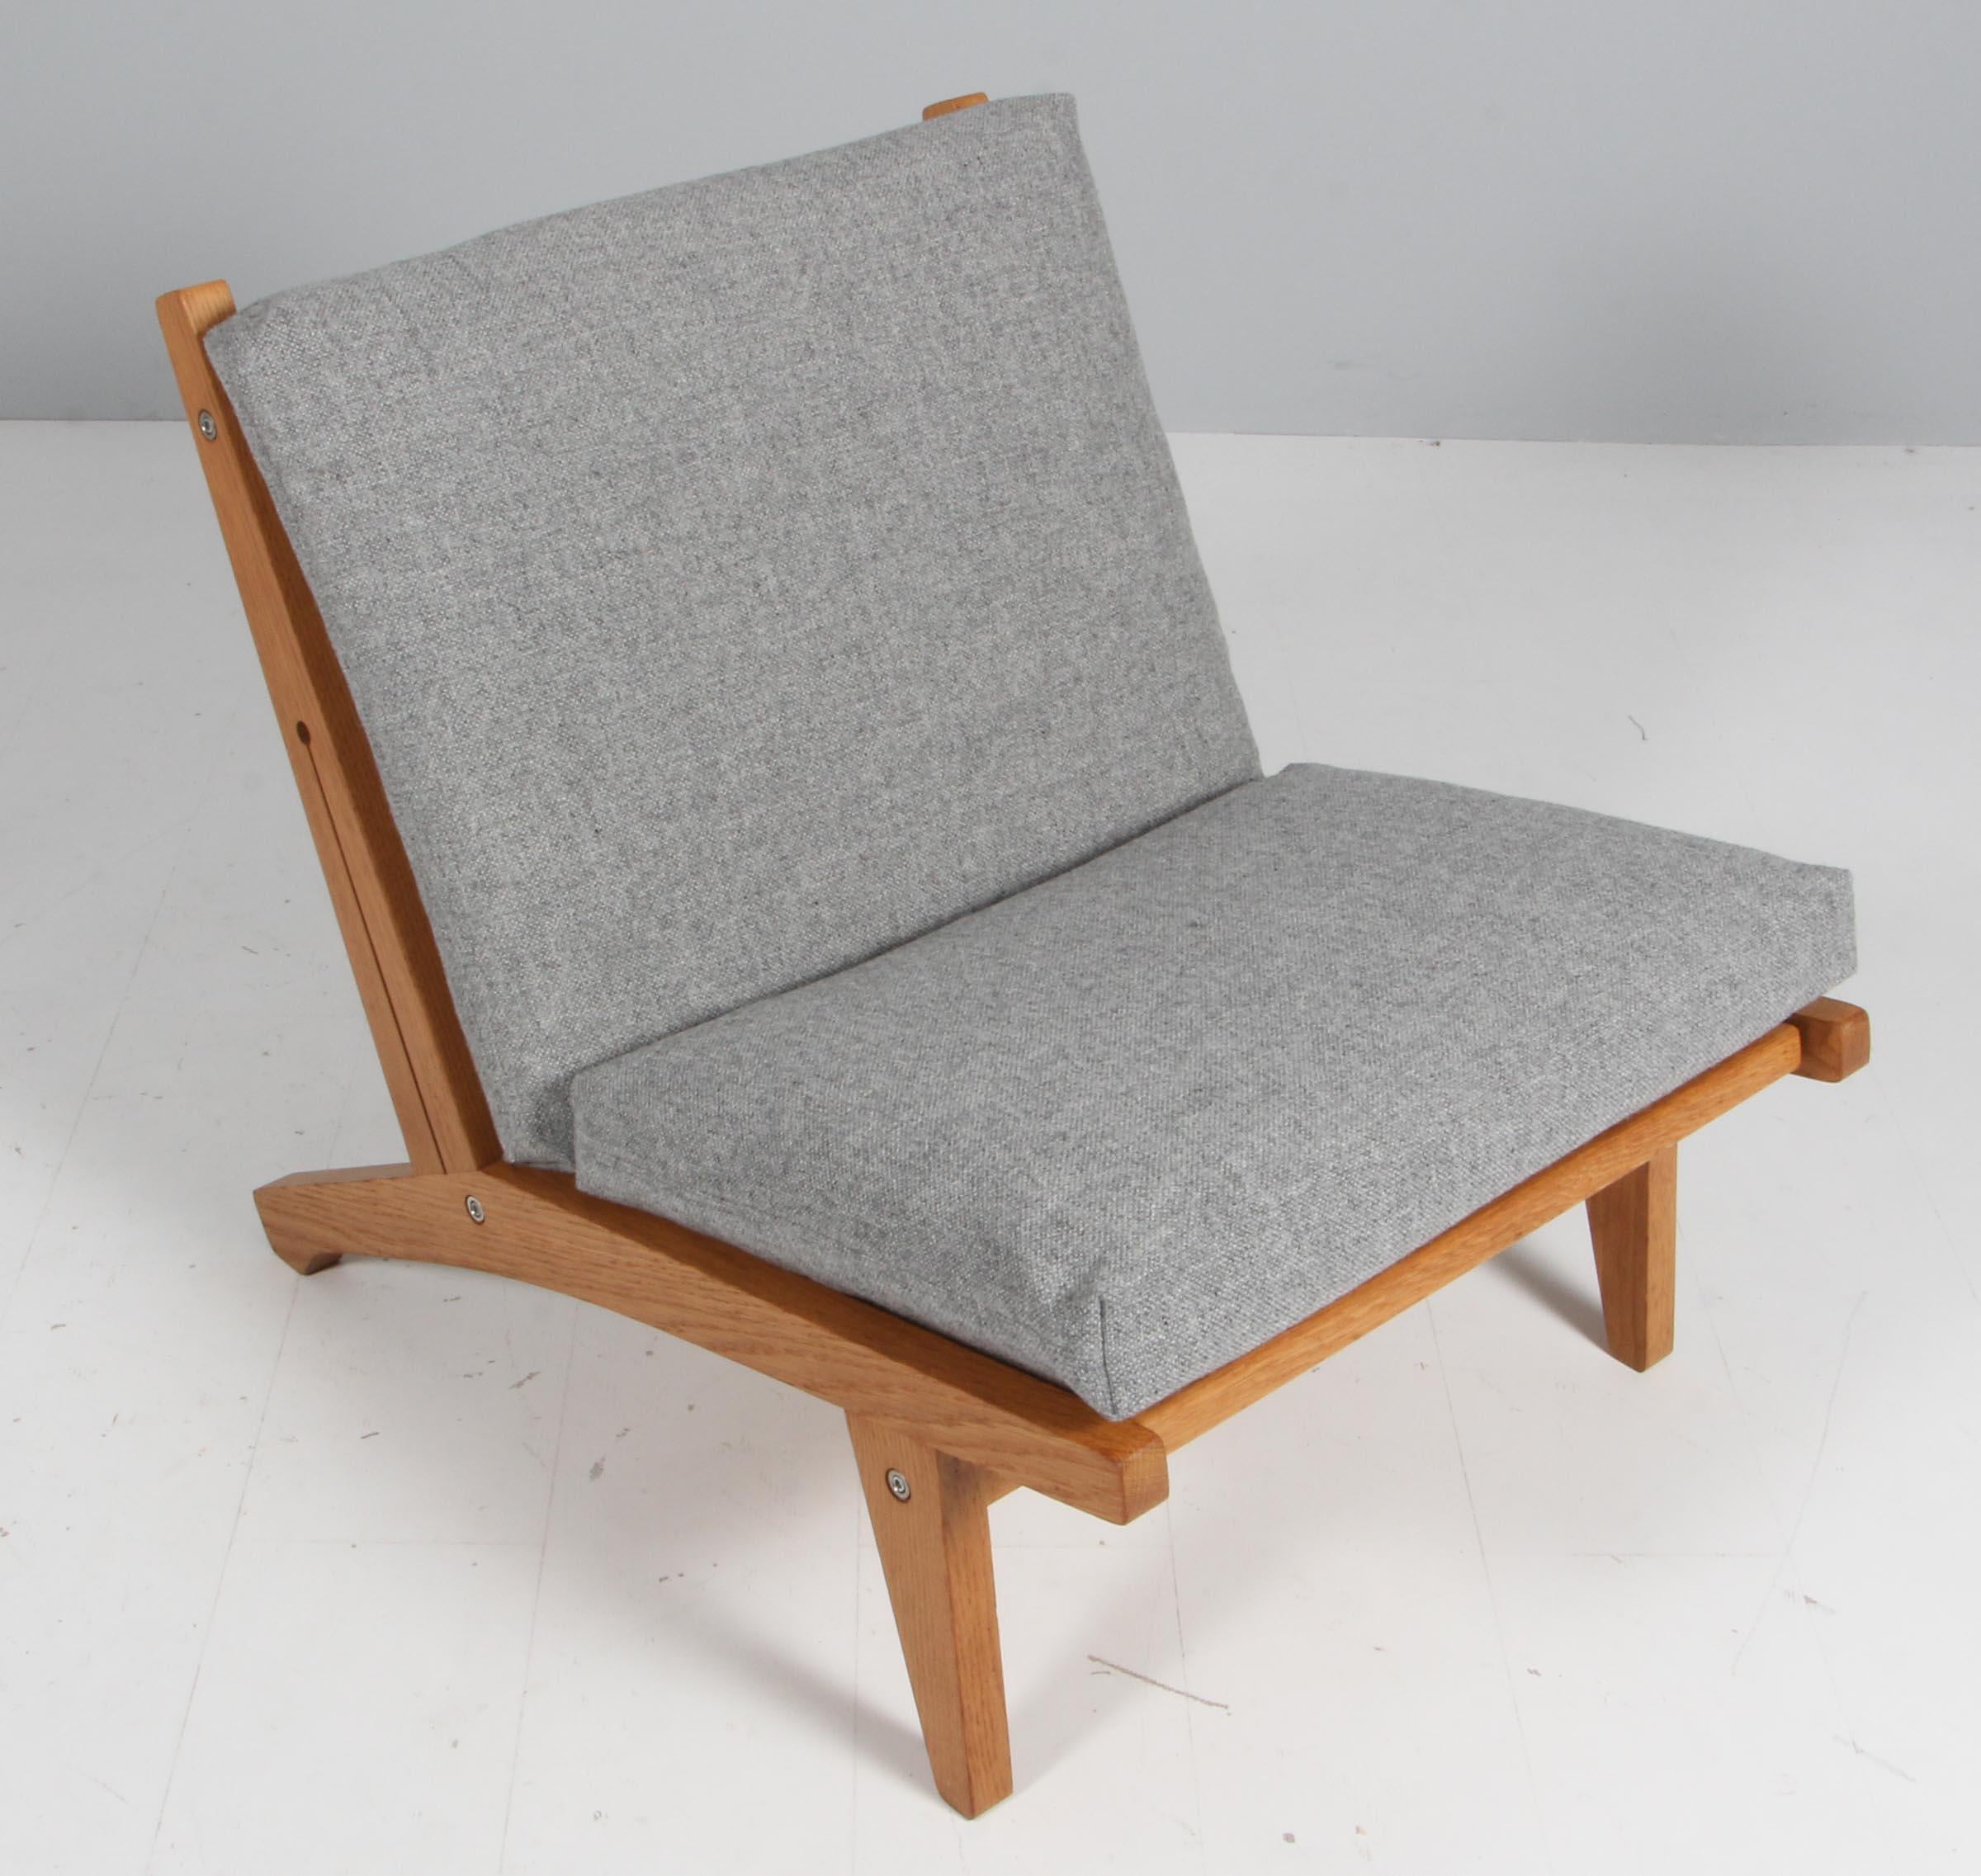 Hans J. Wegner lounge chair with loose cushions new upholstered with grey 130 Hallingdal from Kvadrat.

Frame of solid oak

Model GE-370, made by GETAMA.